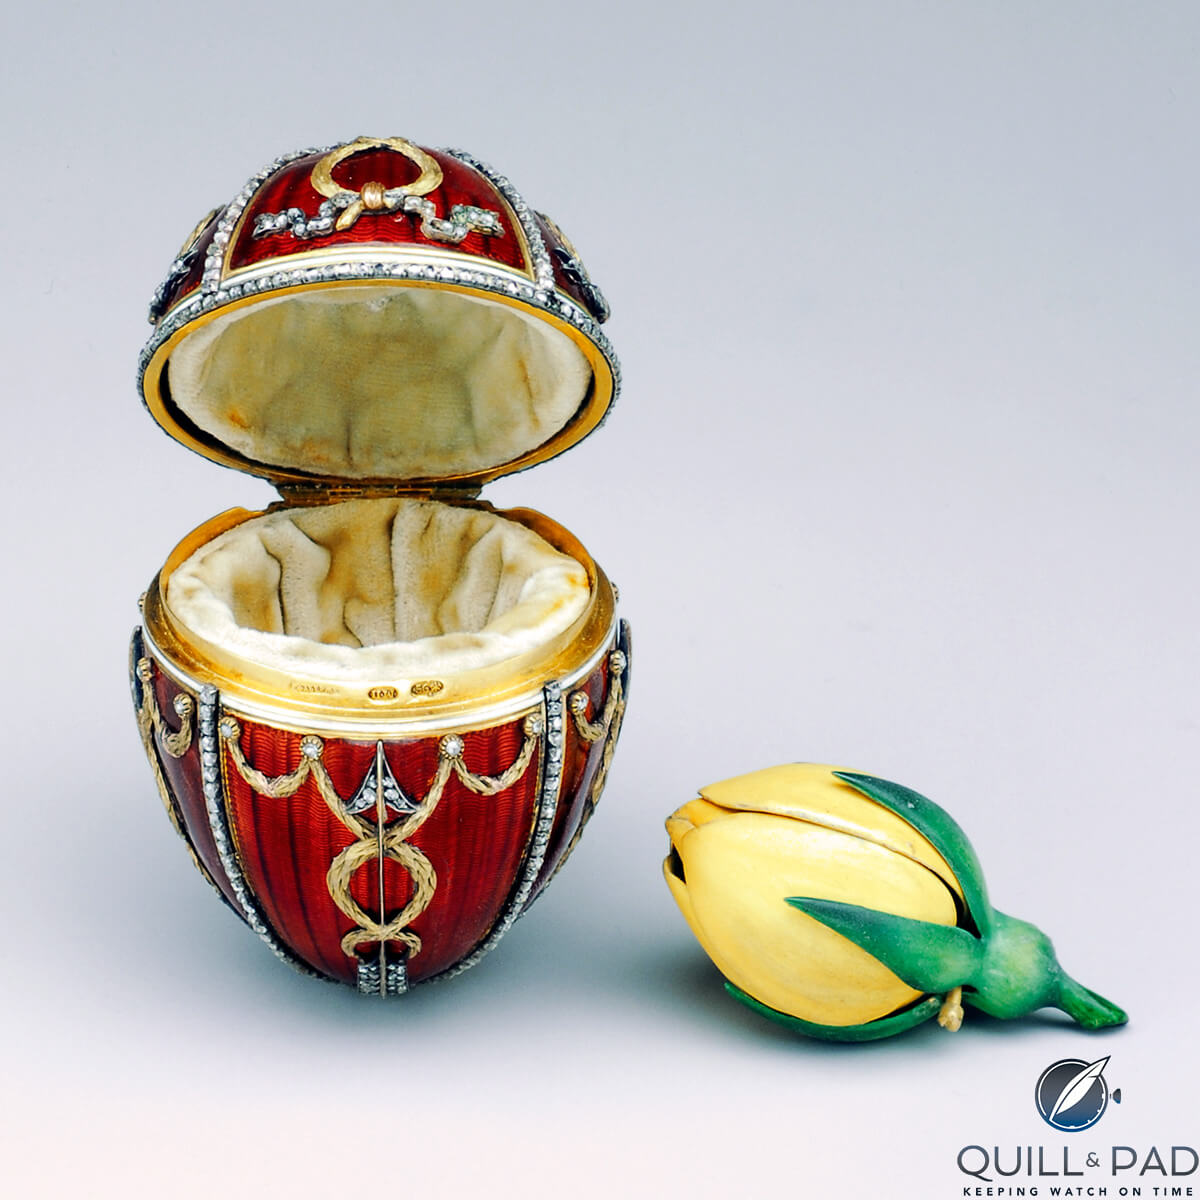 The Fabergé Rosebud Egg from 1895 (photo courtesy The Forbes Collection)